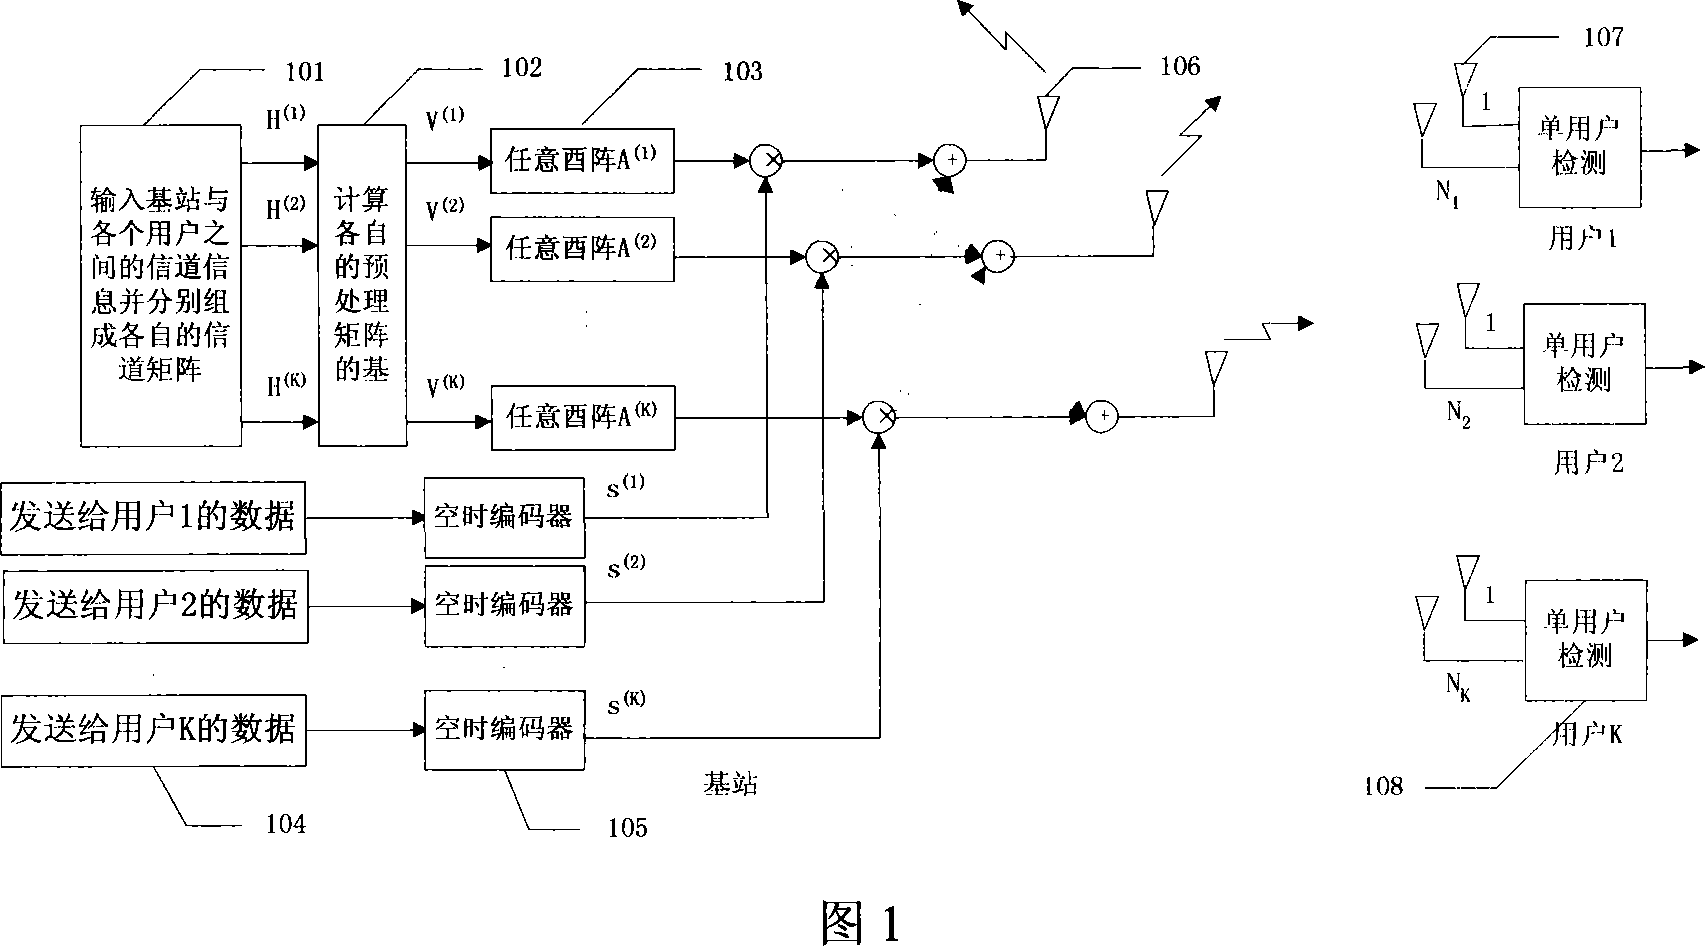 Selection preprocess method for downlink link antenna of multi-user MIMO system